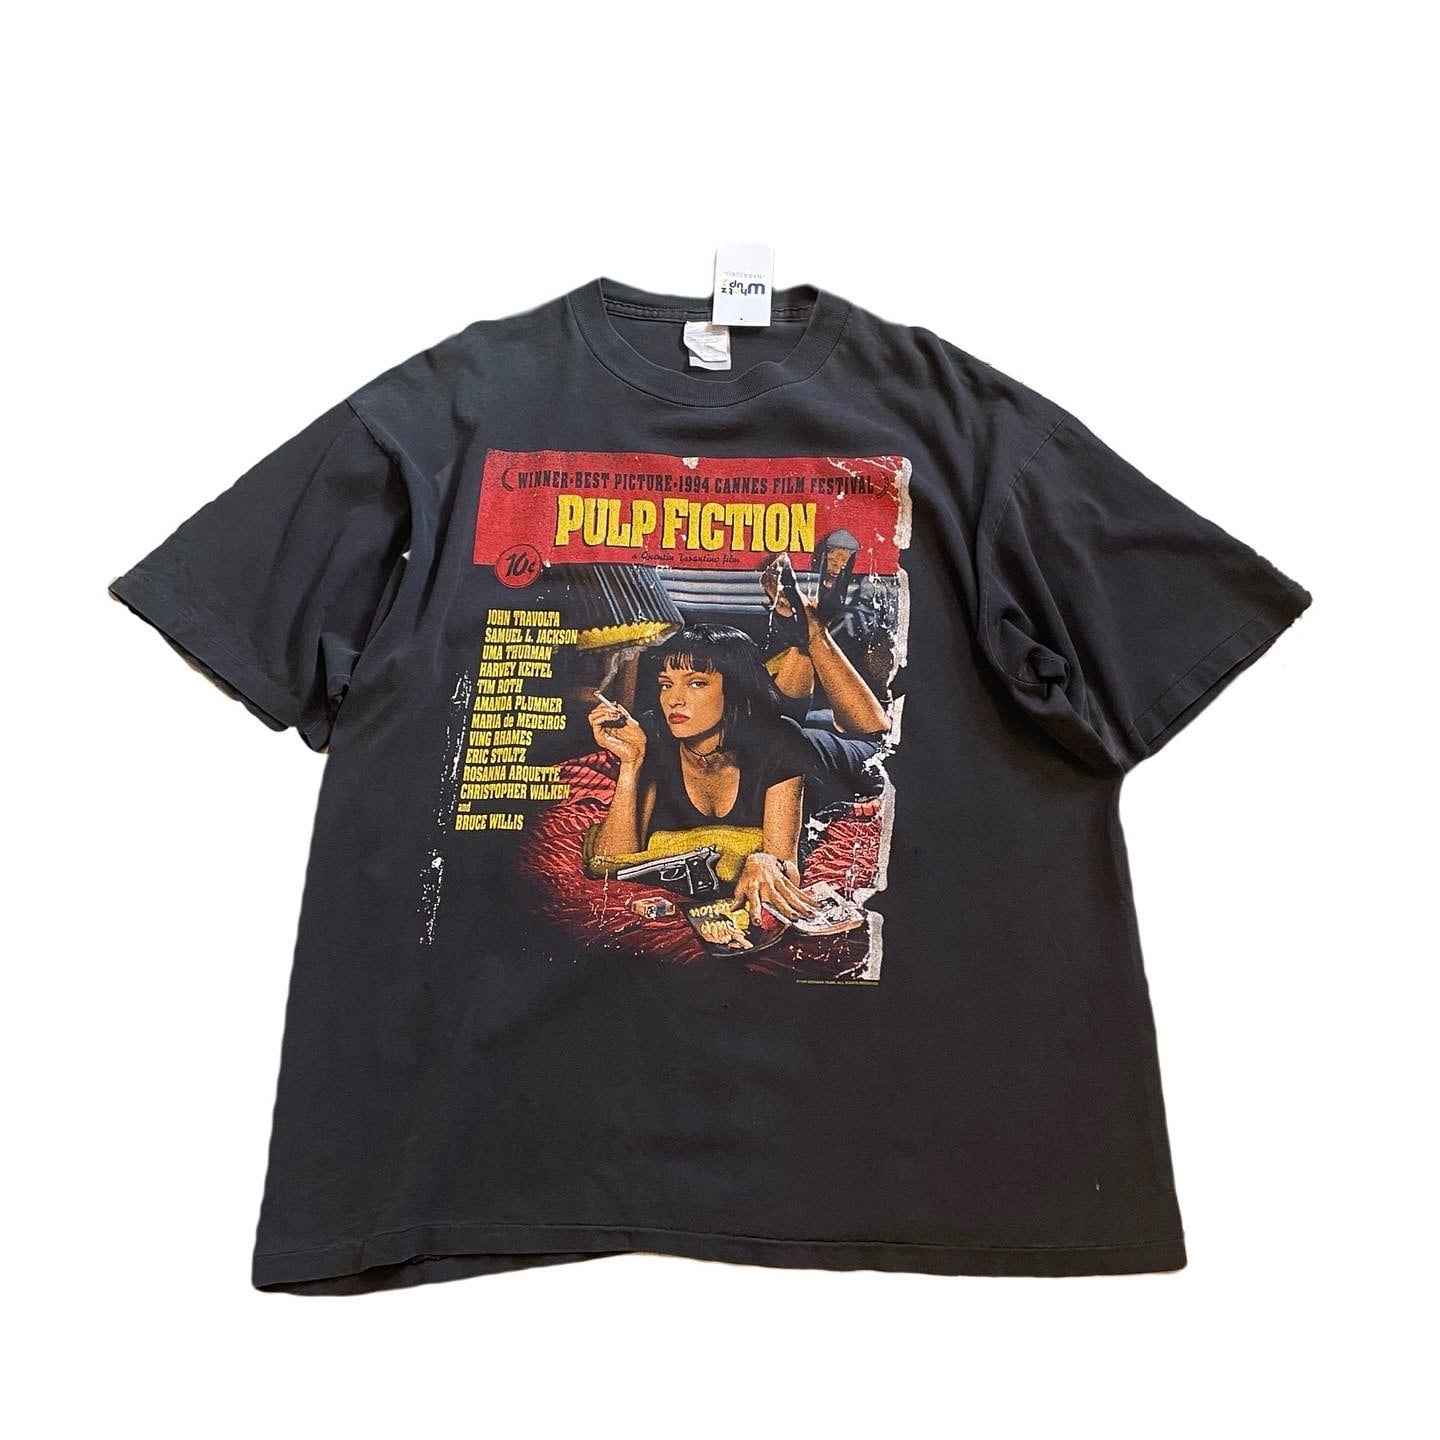 90s PULP FICTION T-shirt | What’z up powered by BASE